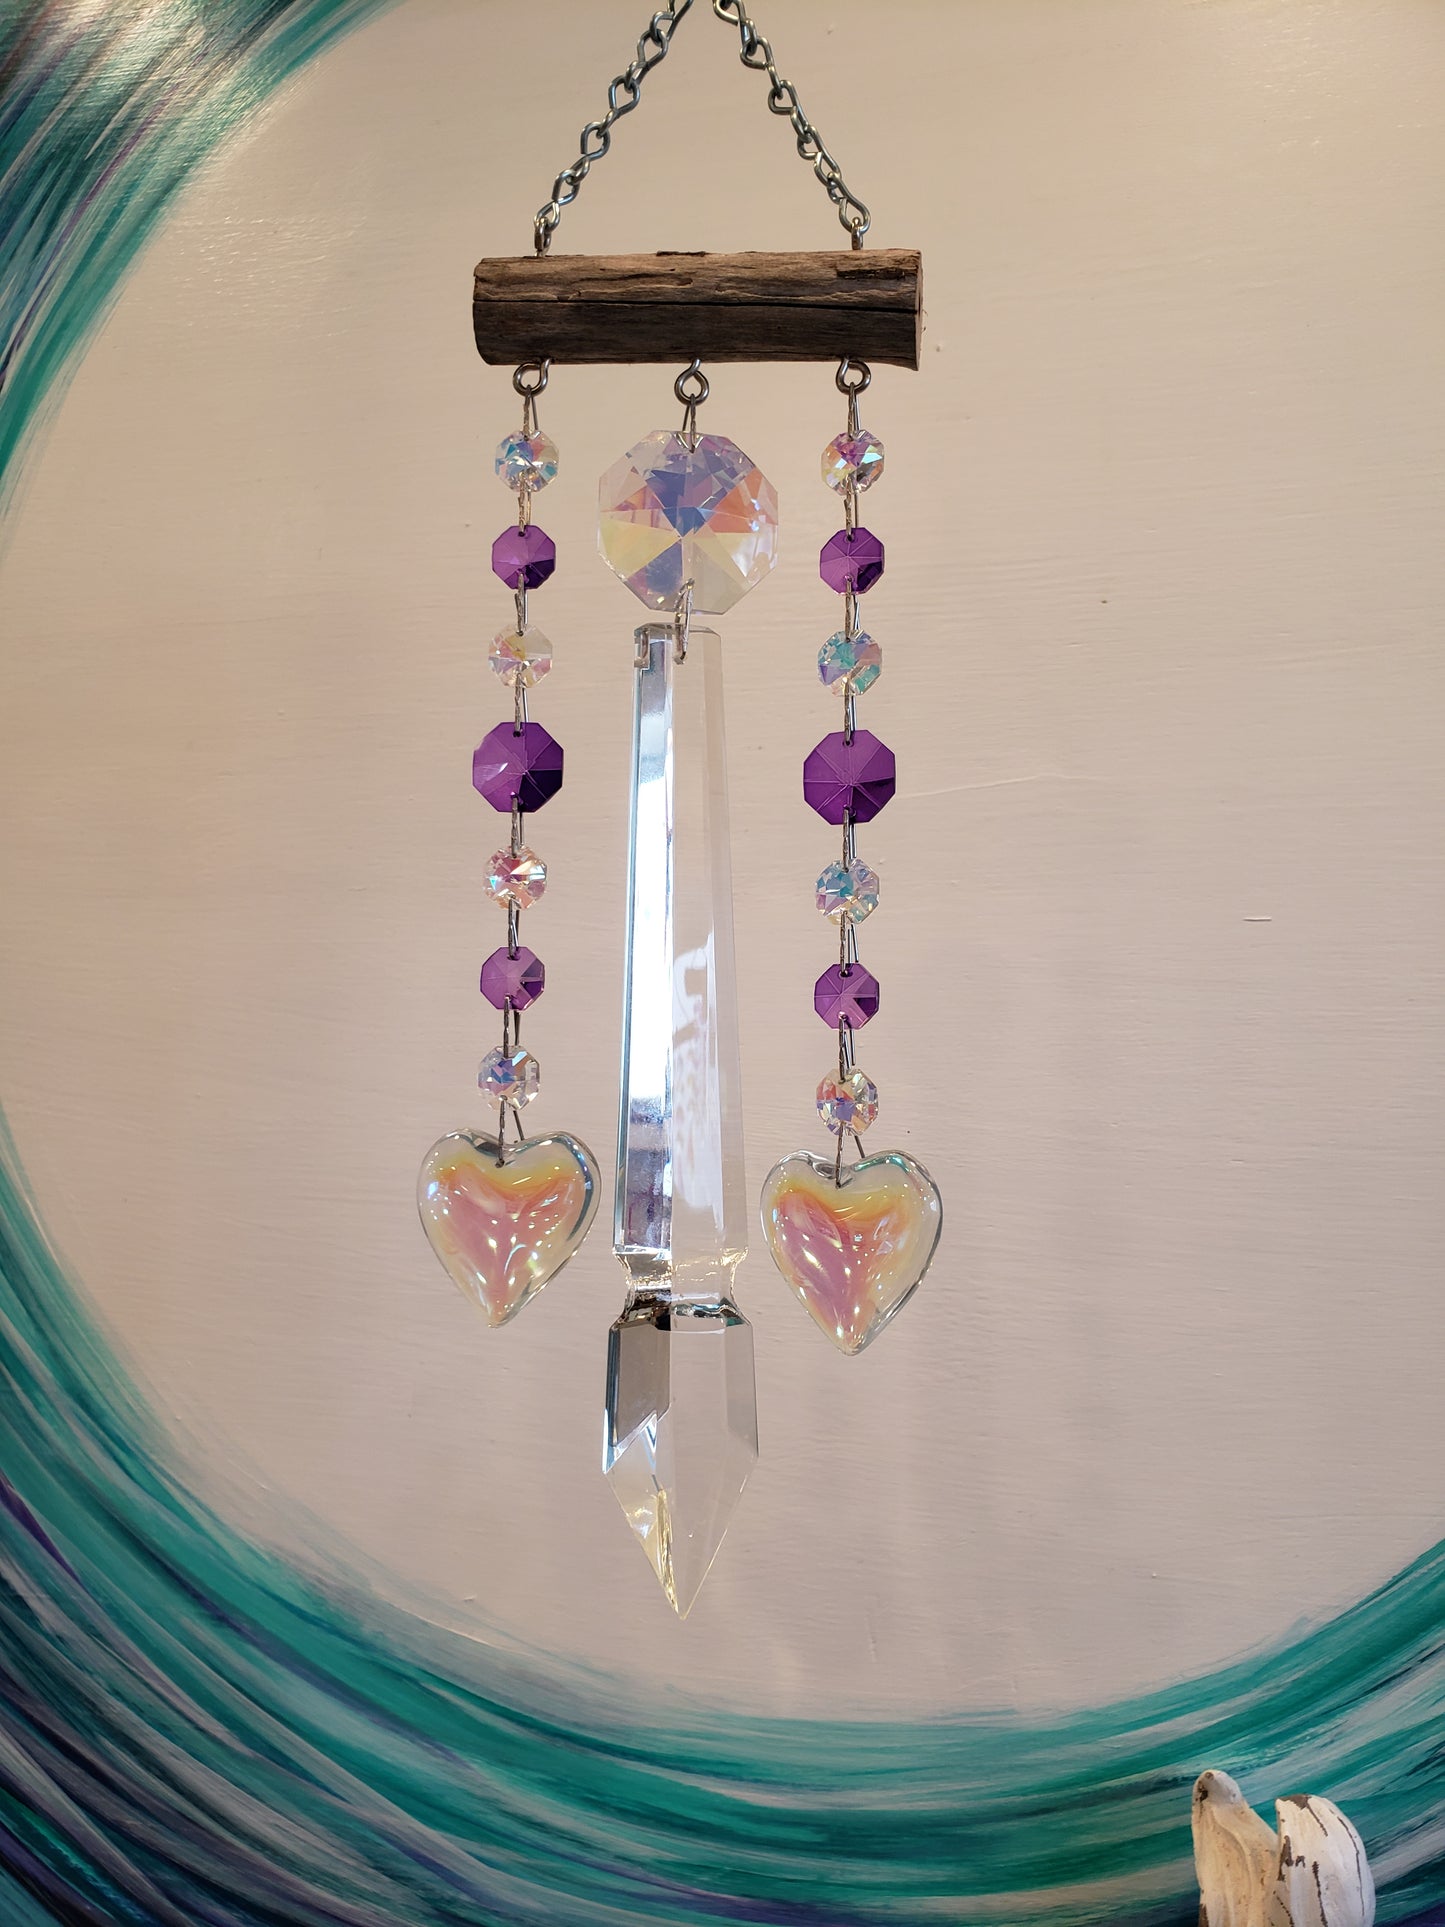 Dazzling Driftwood hand made wind chime